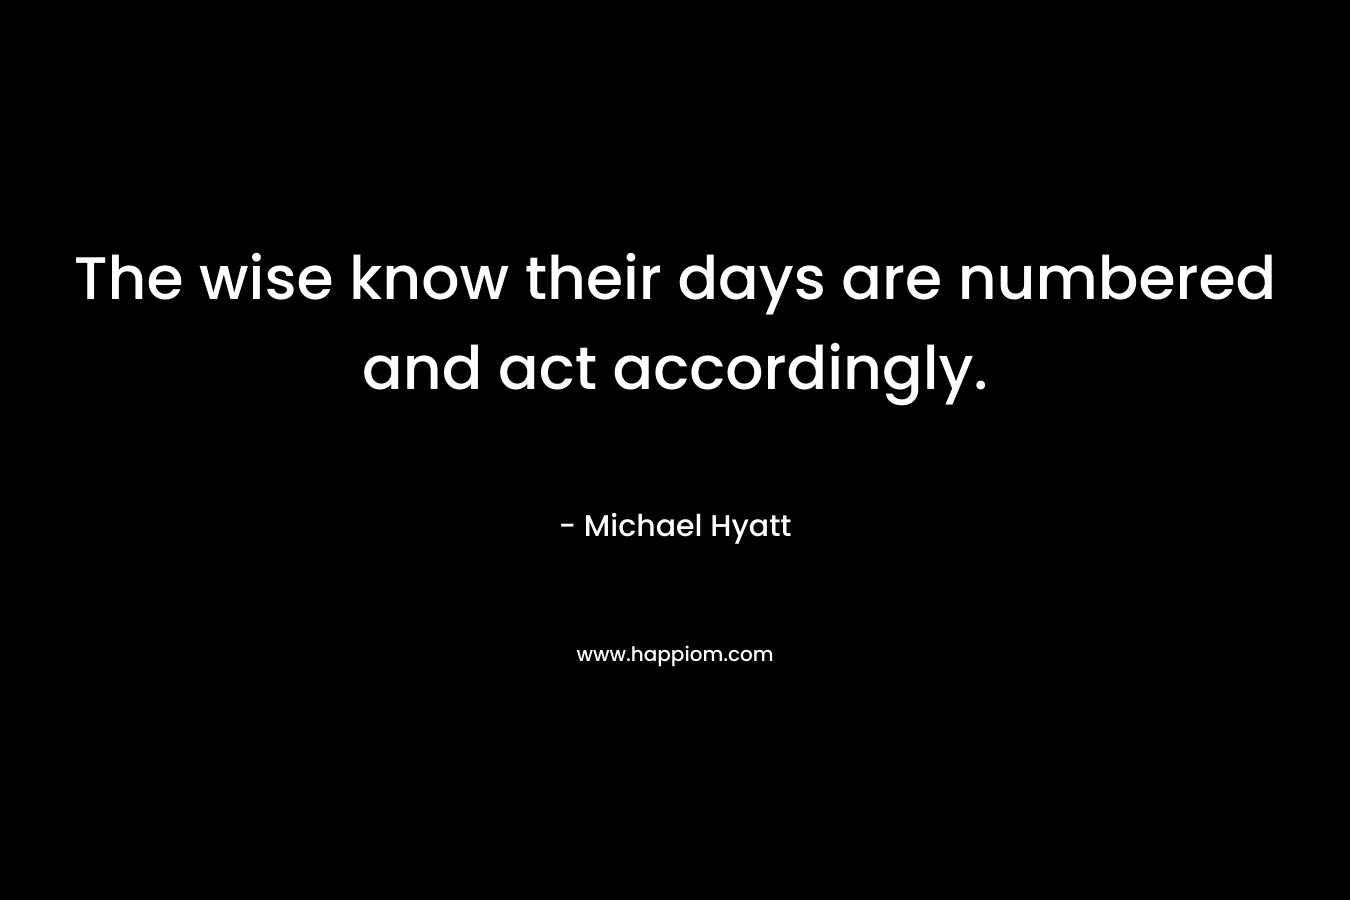 The wise know their days are numbered and act accordingly. – Michael Hyatt